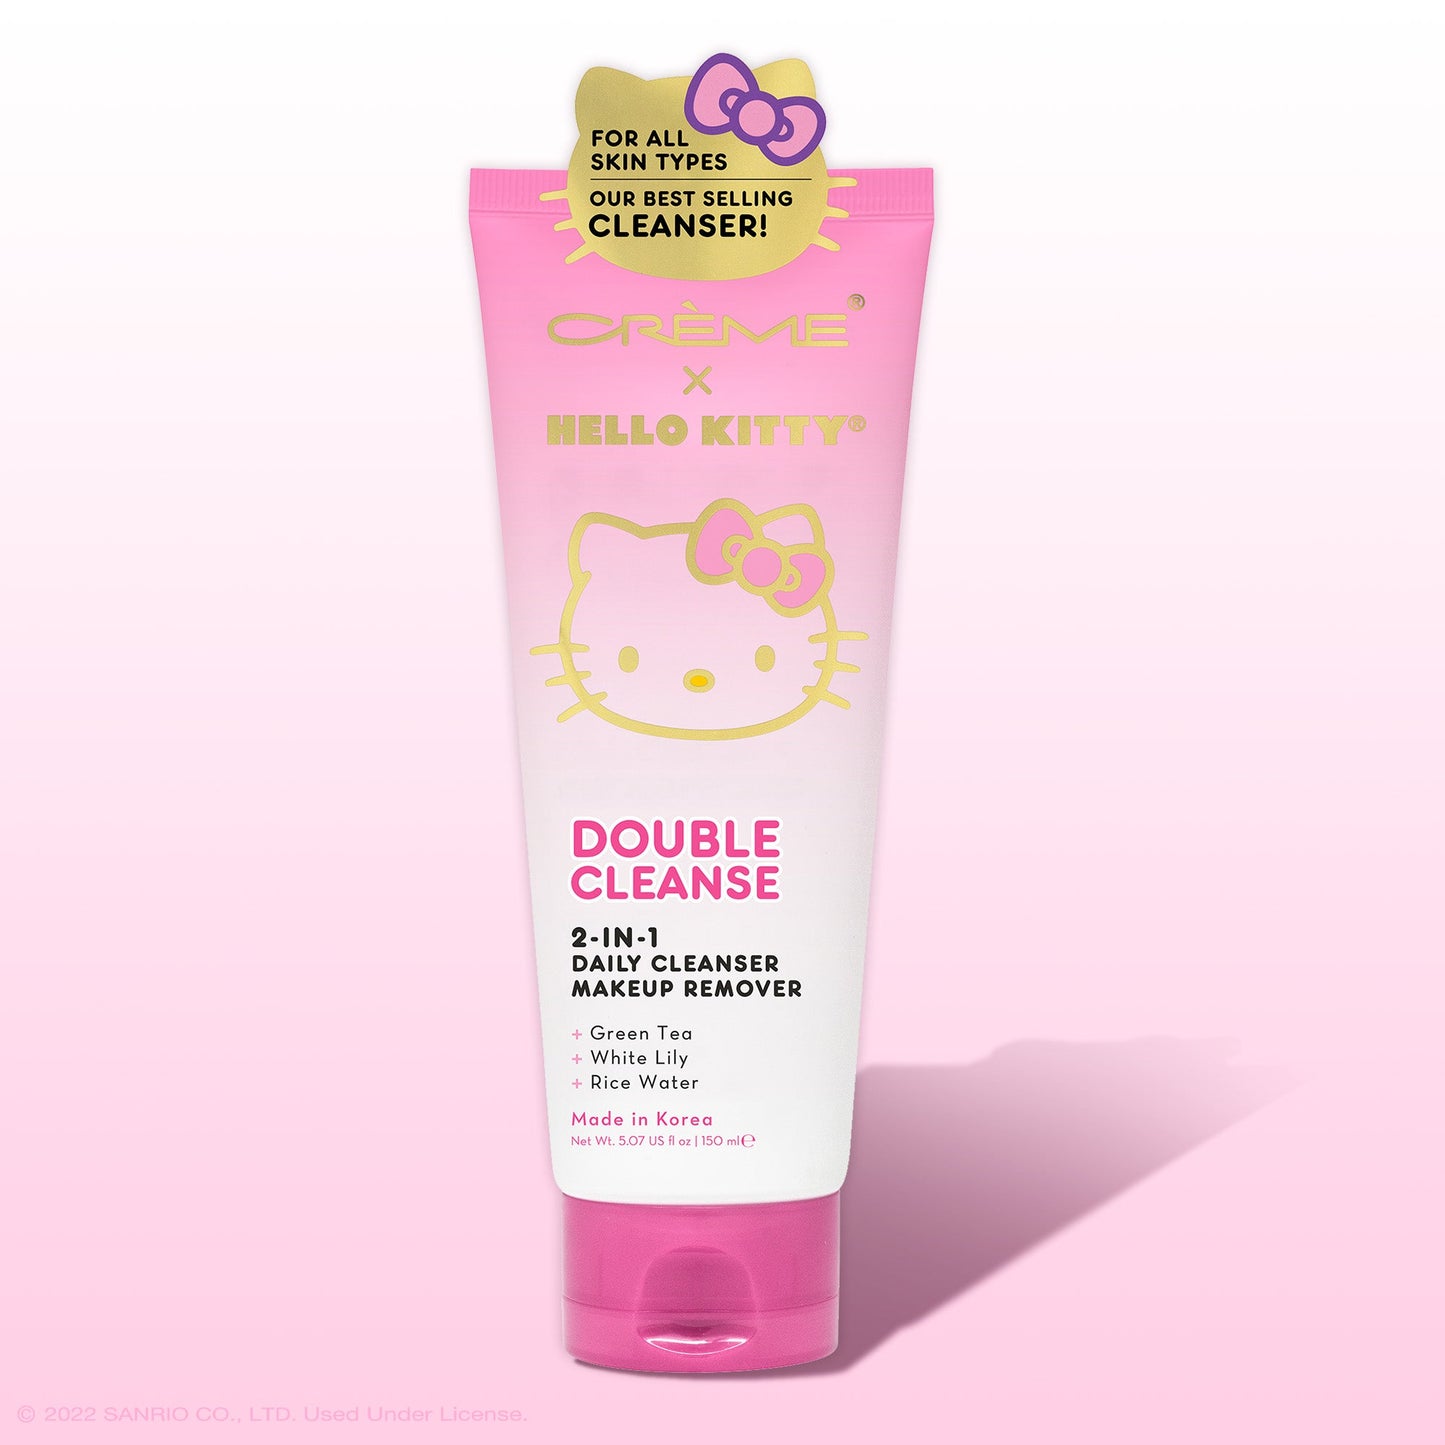 The Crème Shop x Hello Kitty Double Cleanse 2-In-1 Facial Cleanser Skin Care The Crème Shop x Sanrio 